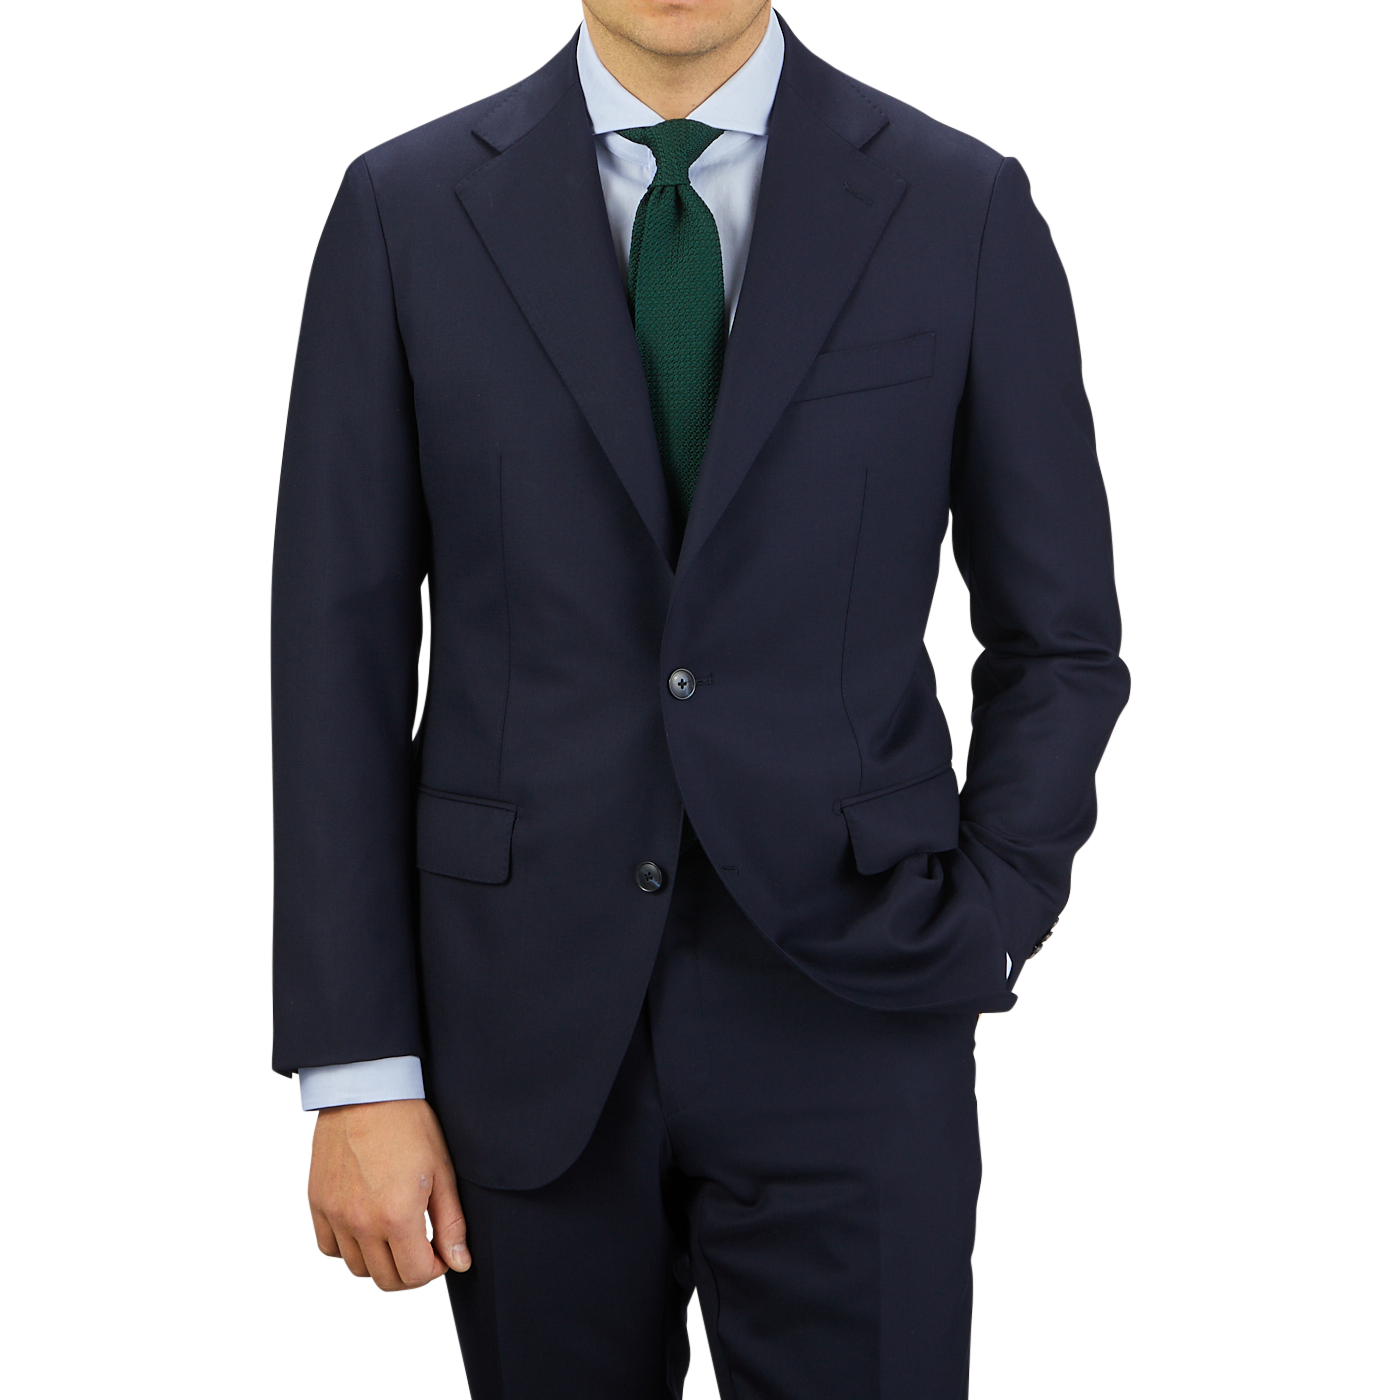 Man in a Baltzar Sartorial Navy Super 100's Wool Suit Jacket with a teal tie standing against a grey background.